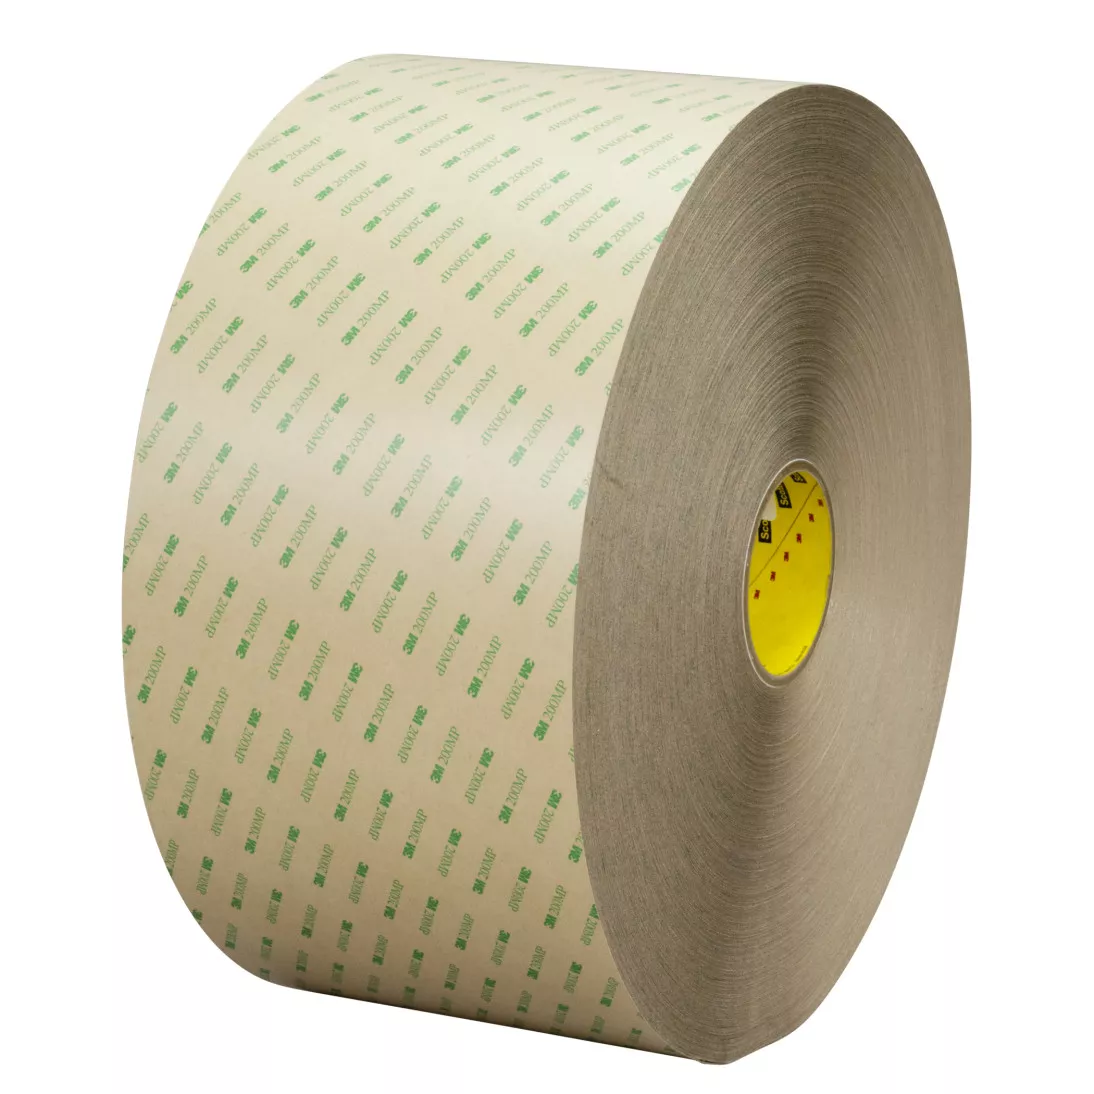 3M™ Adhesive Transfer Tape 9668MP, Clear, 12 in x 60 yd, 5 Mil, 4/Case